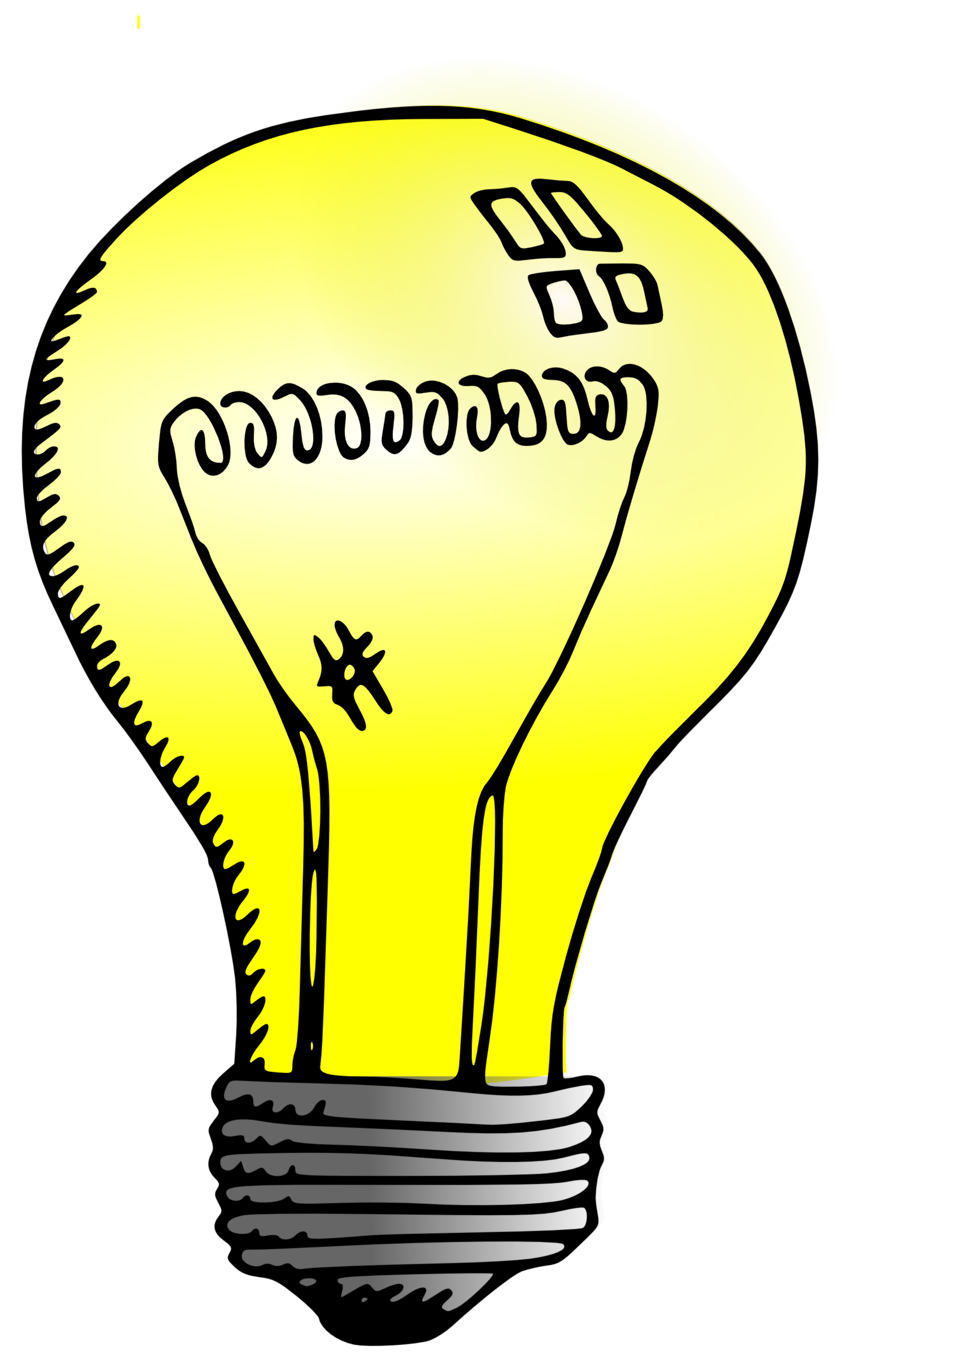 electricity clipart incandescent